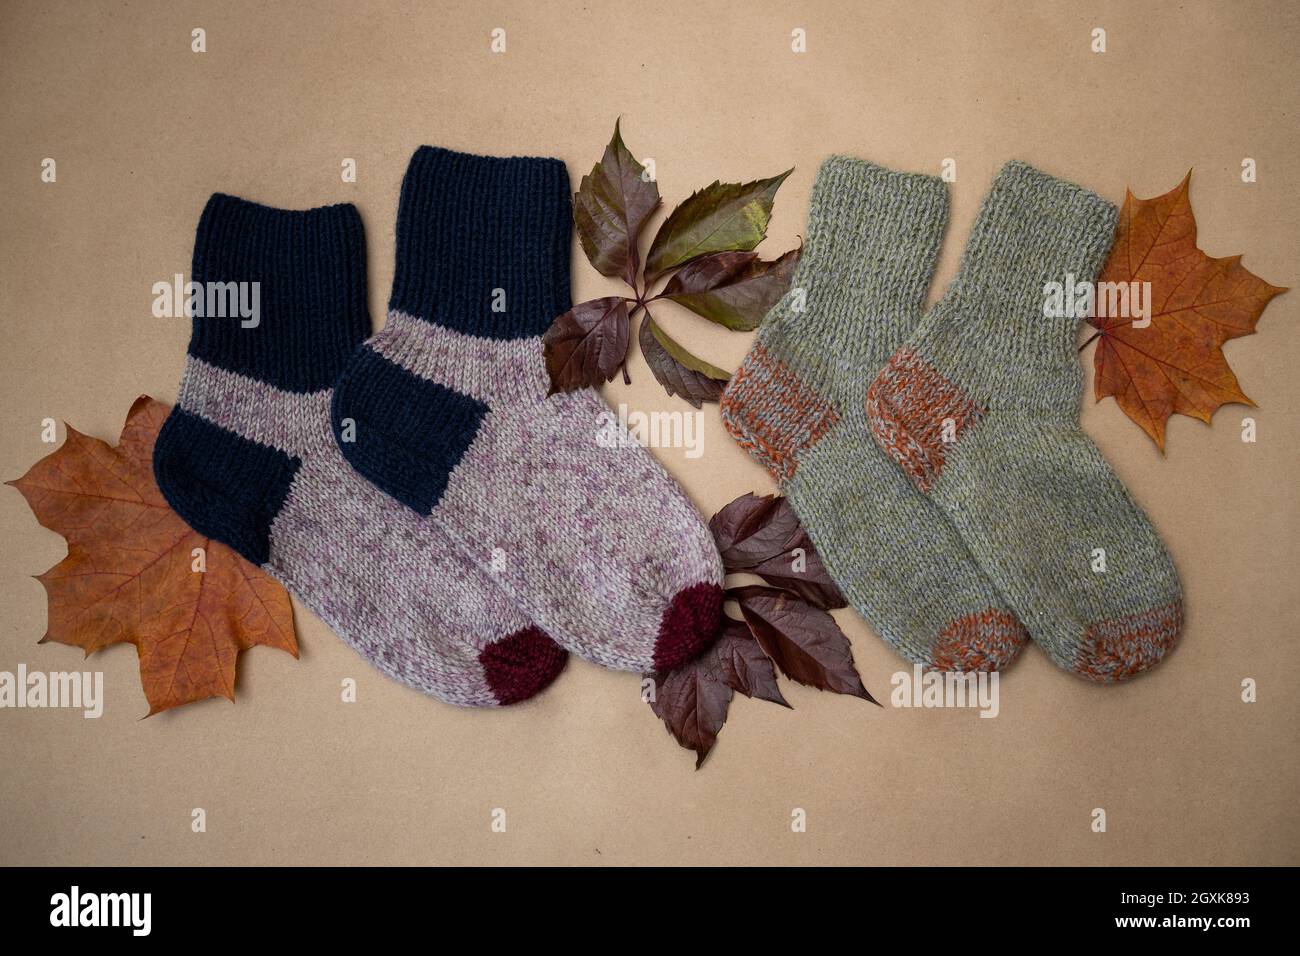 Hand-knitted socks in autumn colors and autumn foliage lie on a sheet of craft paper. View from above. Stock Photo